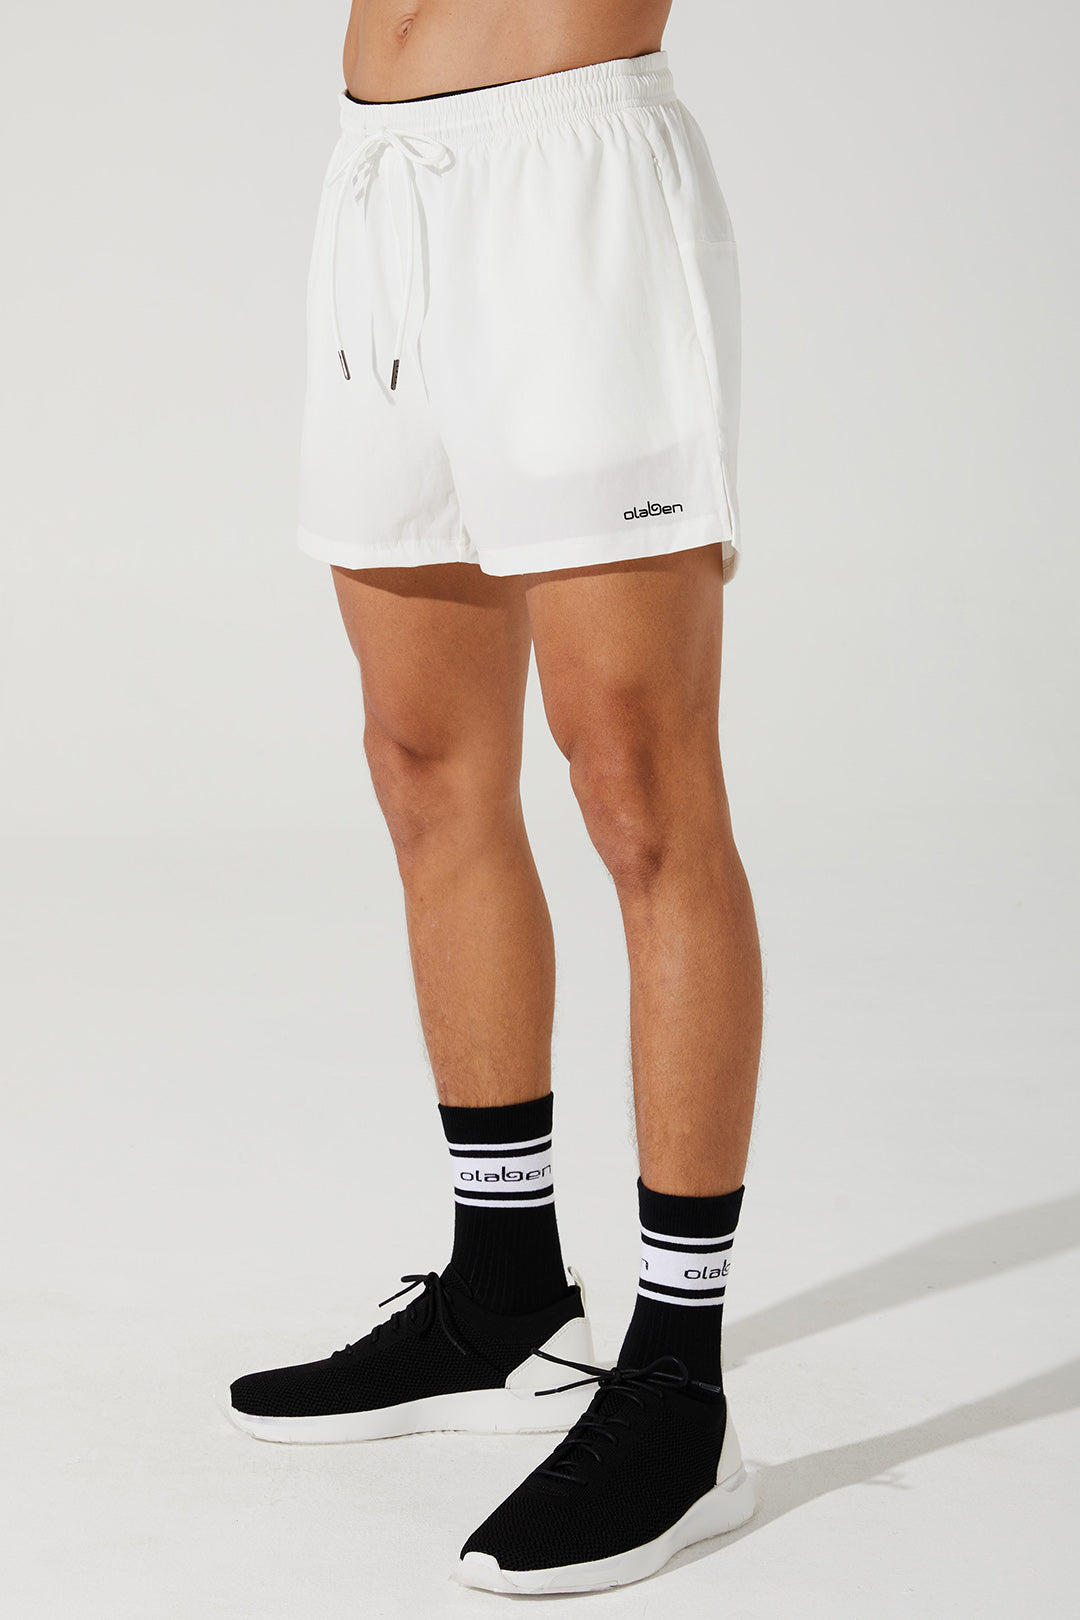 White running shorts for men, perfect for adapting to any workout. (Image: verney_5_adapt_running_short_mens_shorts_white_white_OW-0015-MSH-WT_3.jpg)